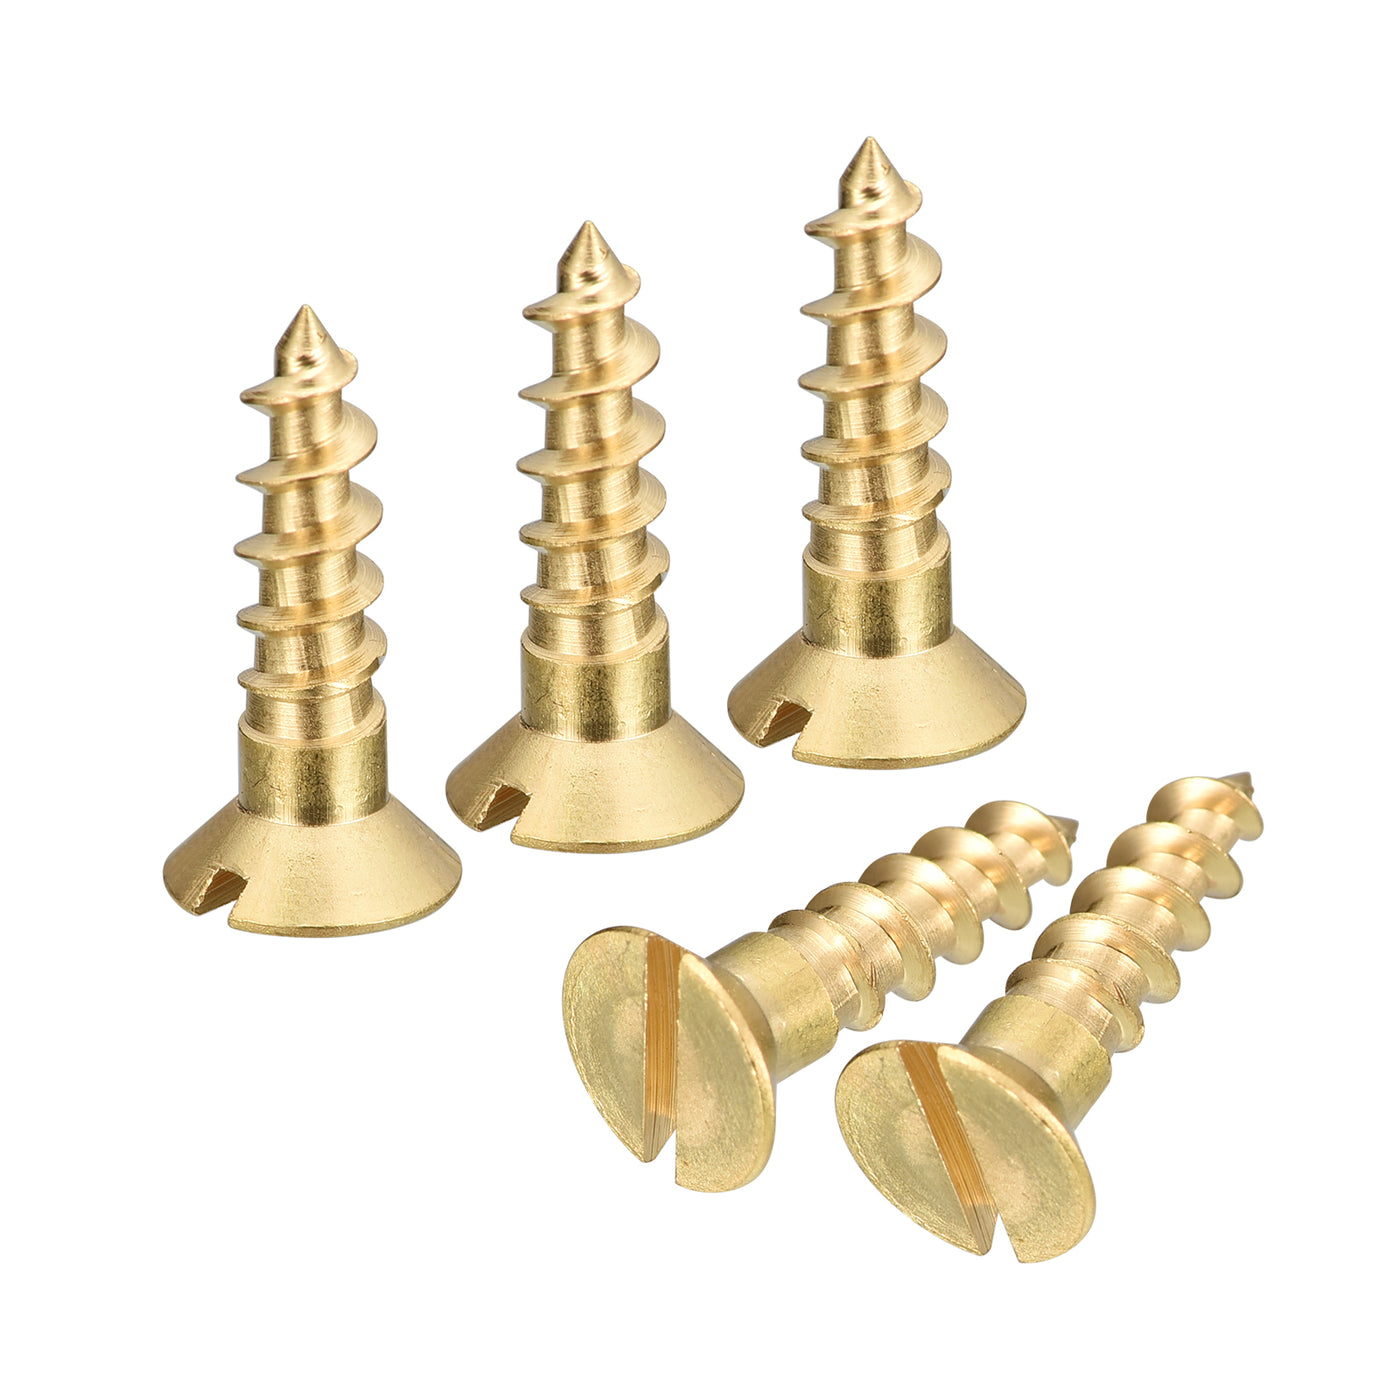 uxcell Uxcell 50Pcs M5 x 20mm Brass Slotted Drive Flat Head Wood Screws Self Tapping Screw